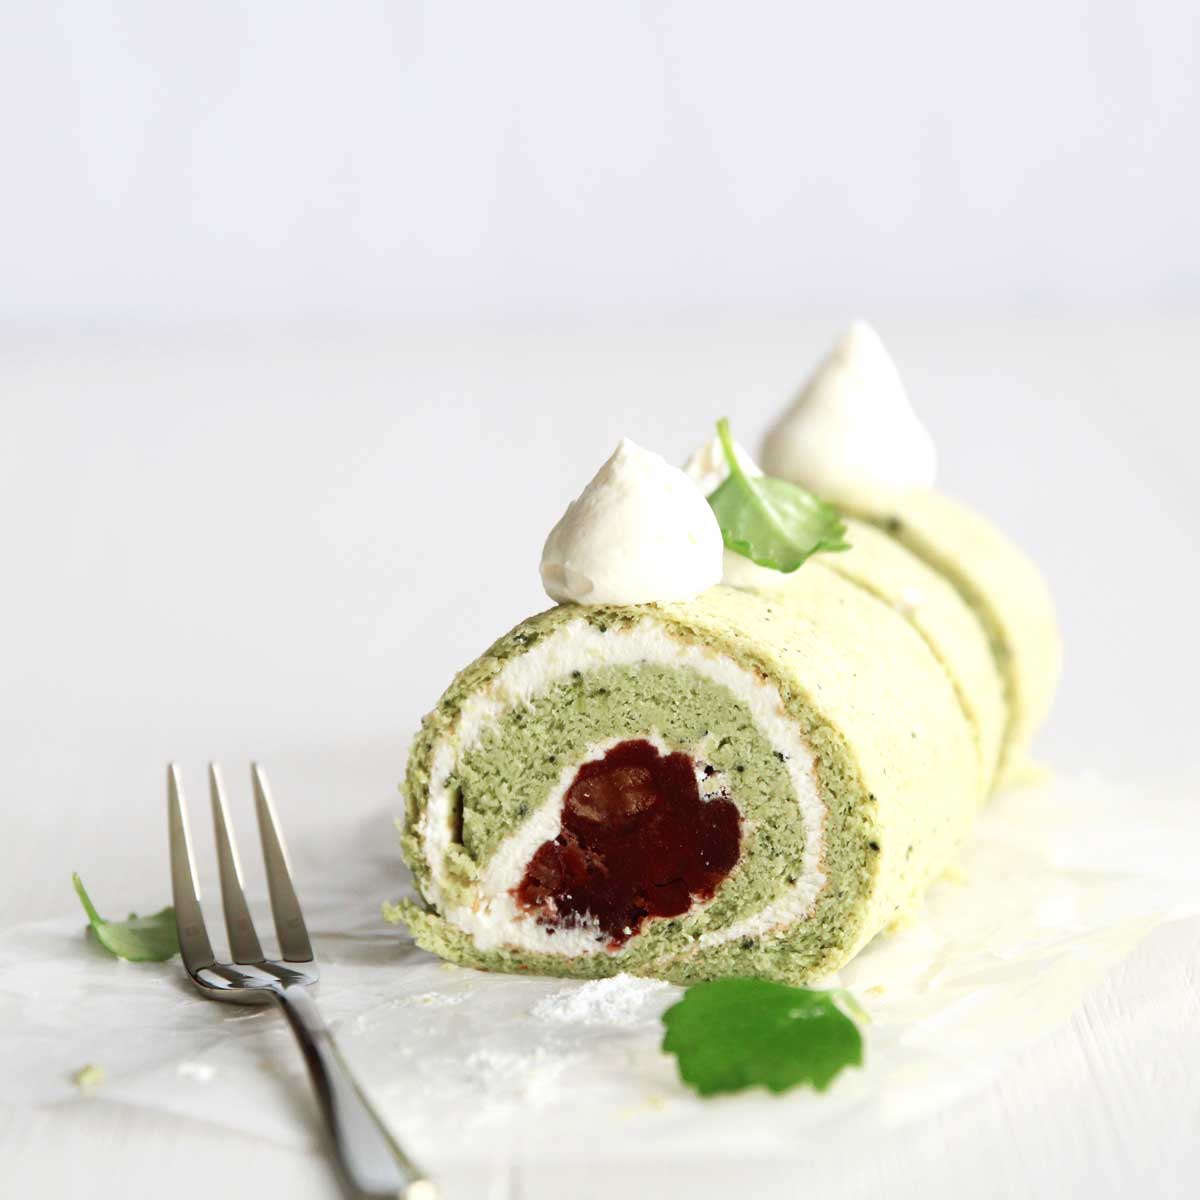 Gluten Free Japanese Matcha Roll Cake with a Sweet Adzuki Filling - Peppermint Whipped Cream